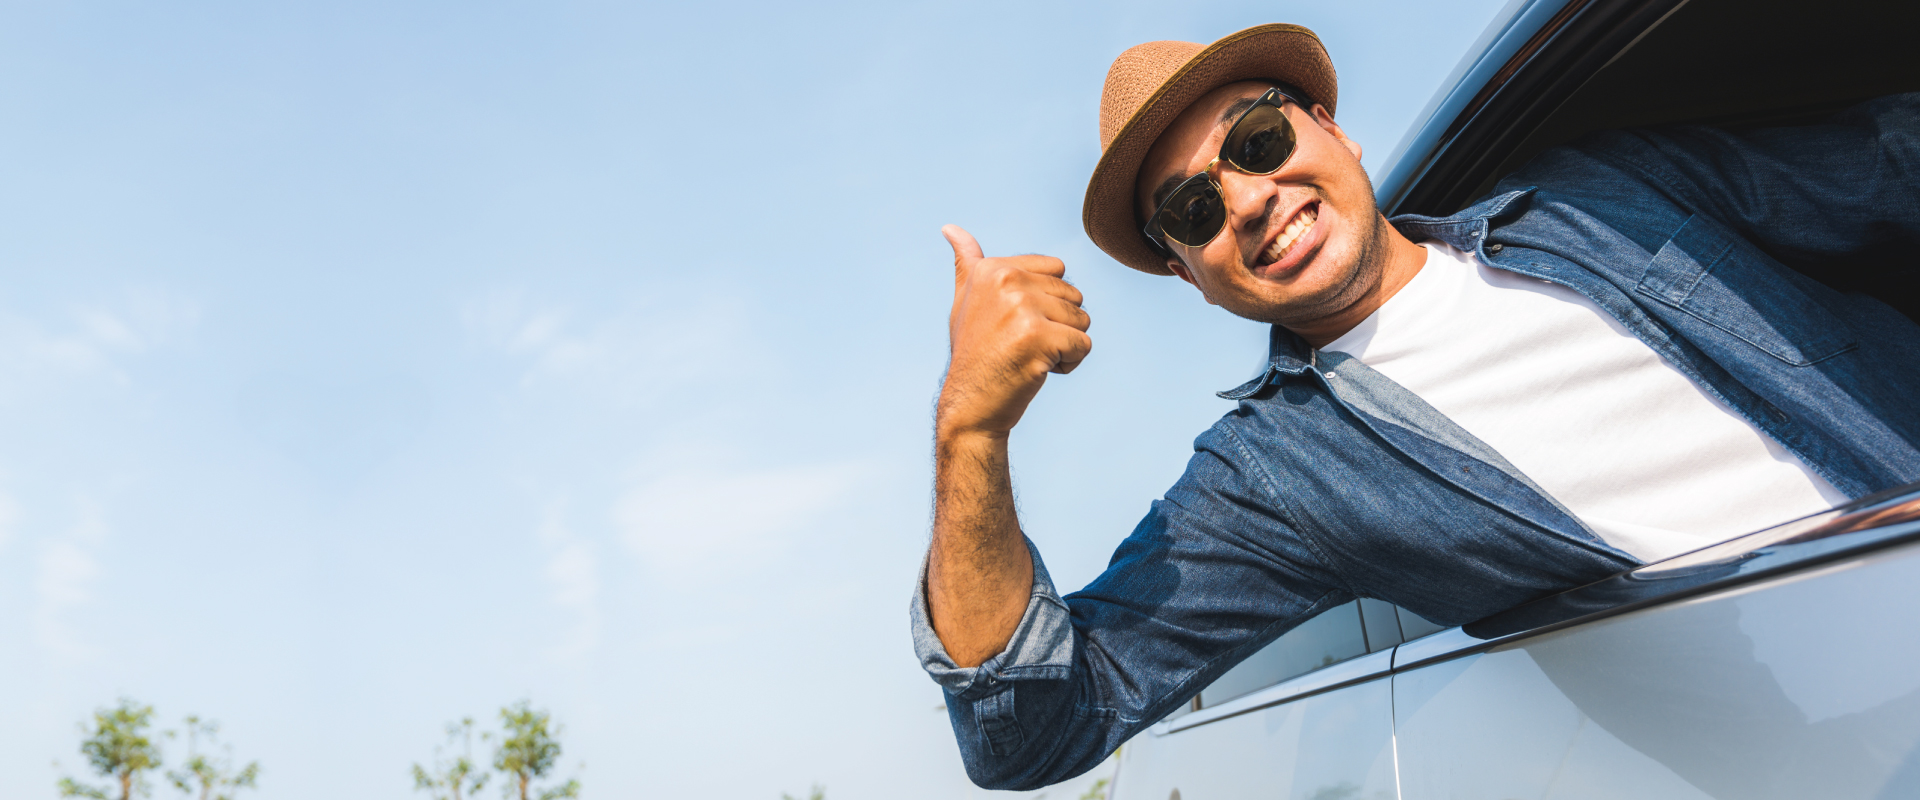 man outside his car window showing a thumbs up